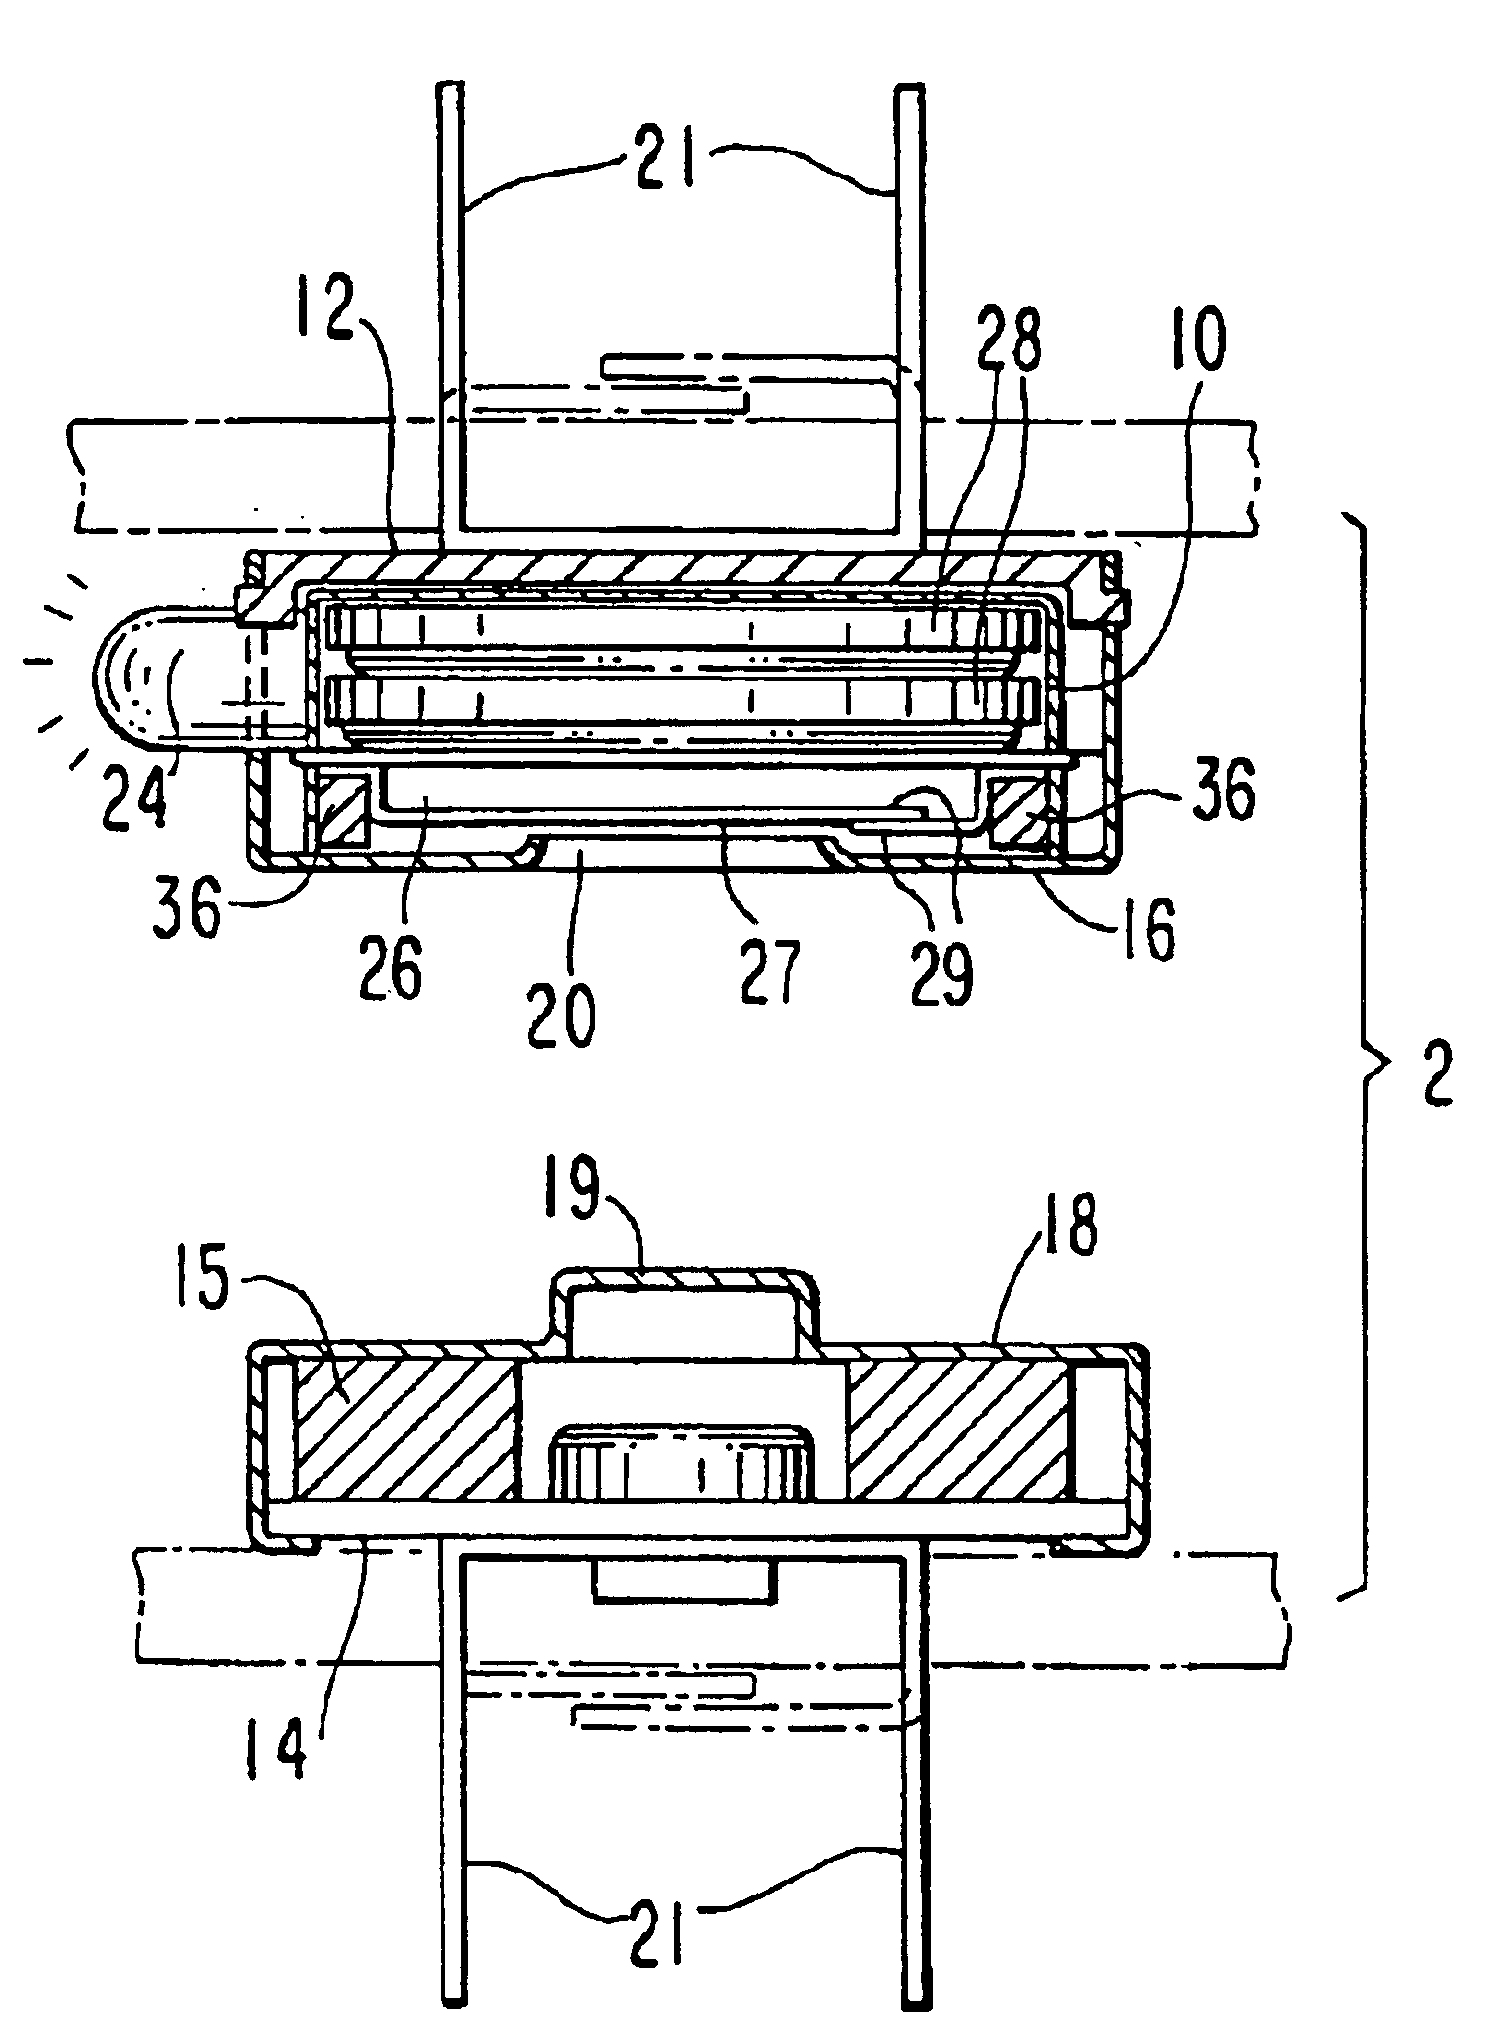 Combination fastener and lighting device